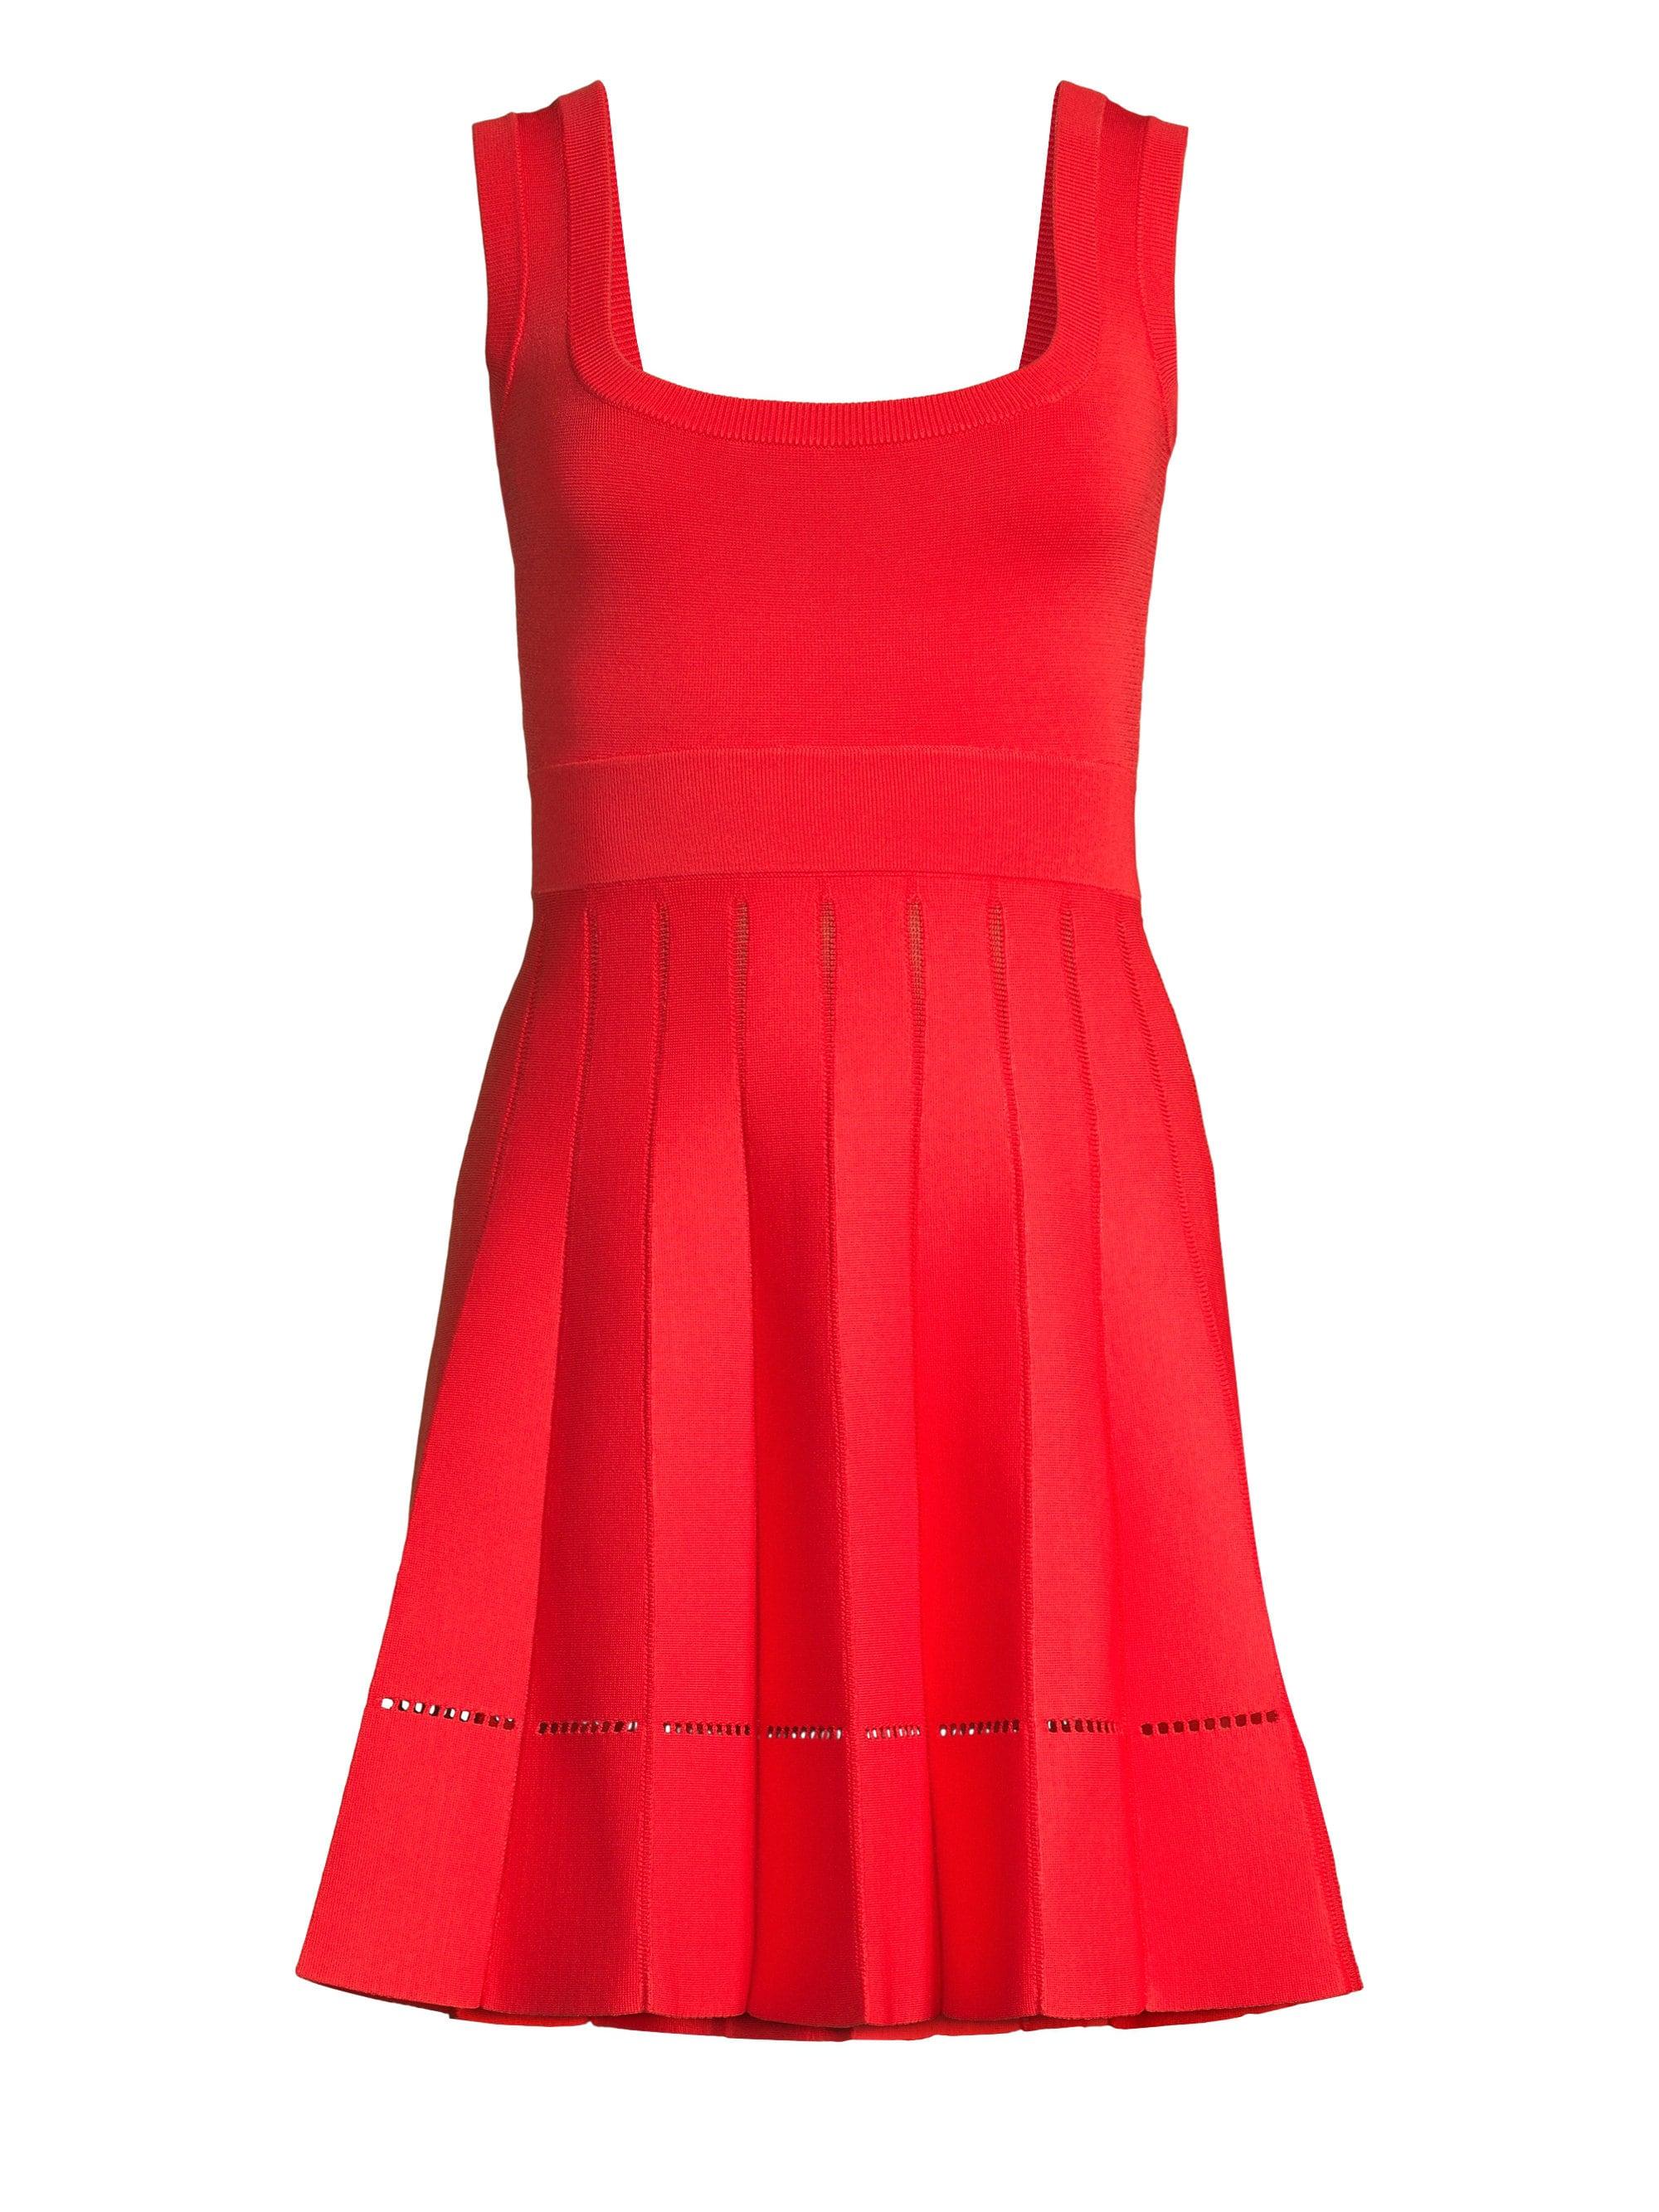 Hervé Léger Pleated Fit-&-flare Dress in Red - Lyst